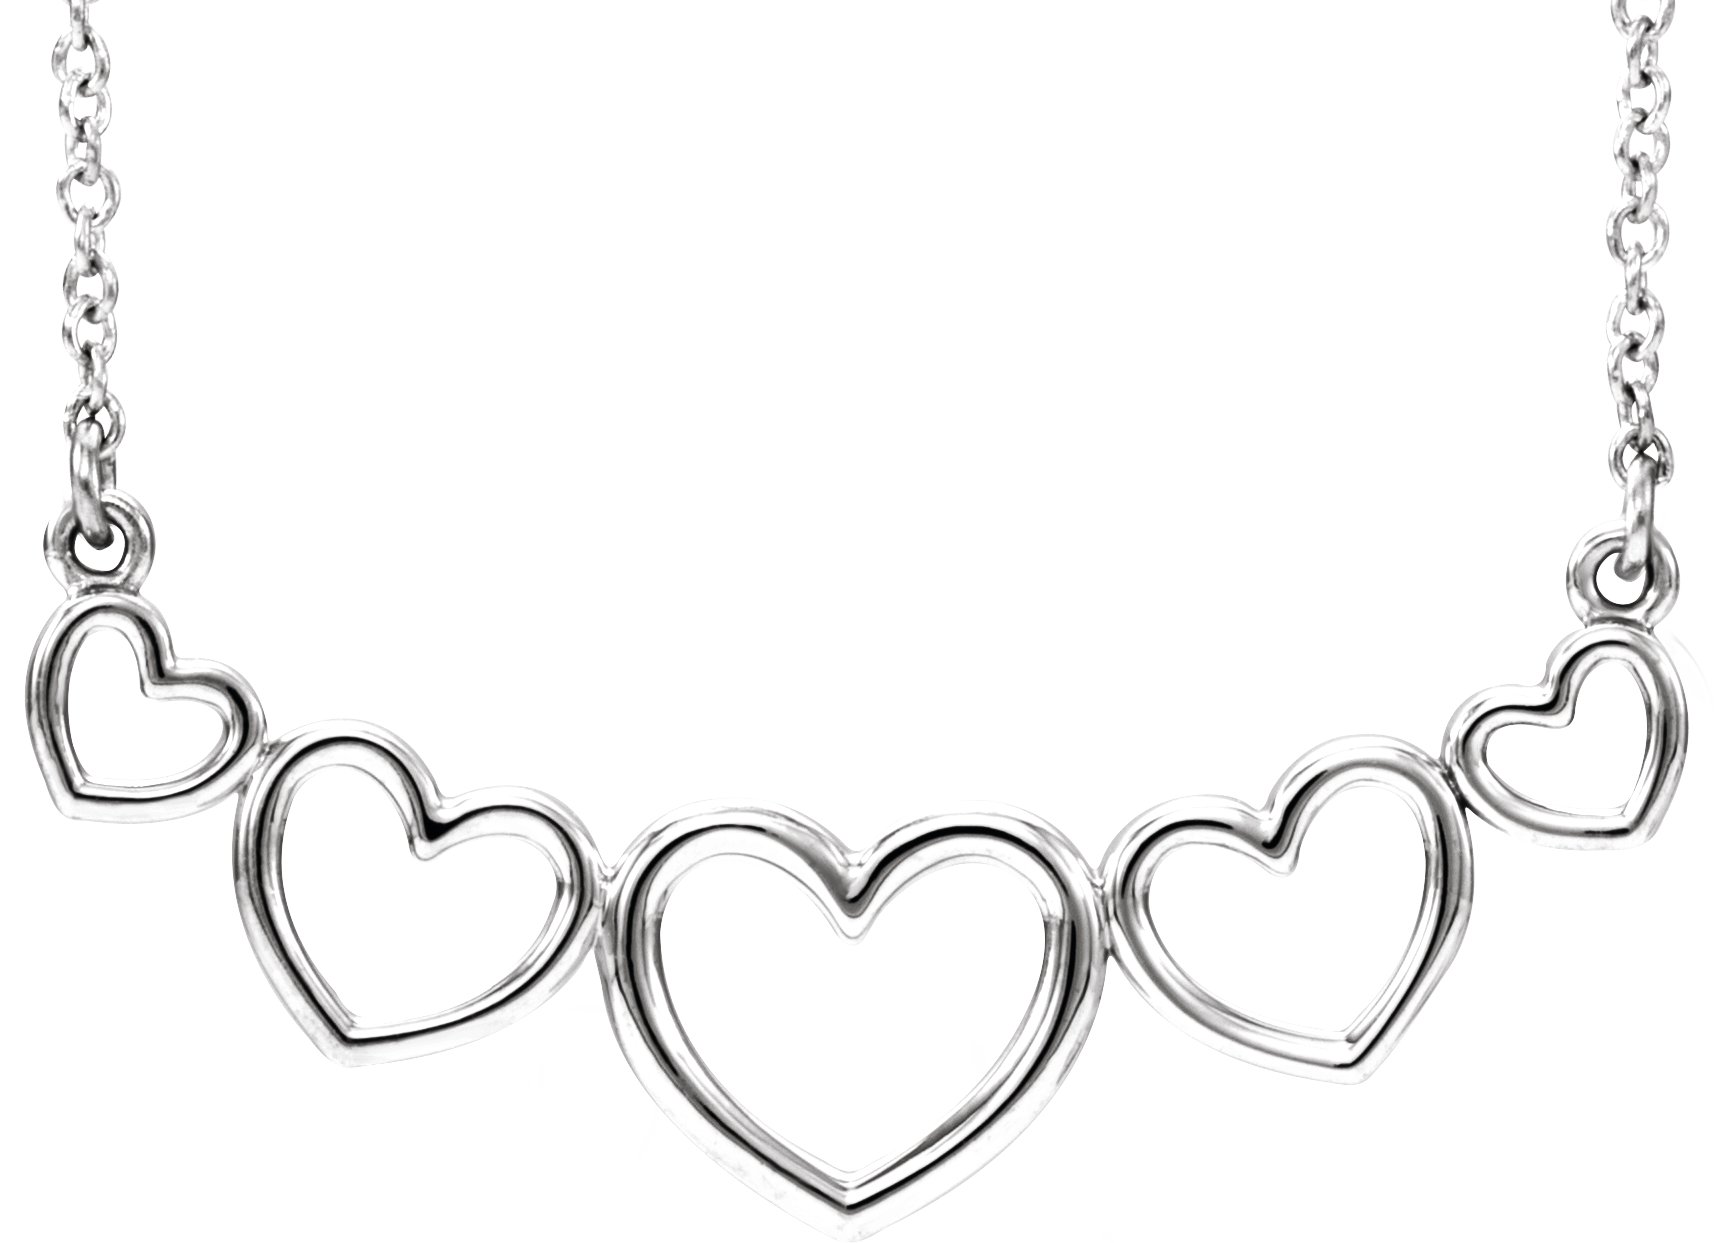 Sterling Silver Graduated Heart 17.5 inch Necklace Ref. 11976263